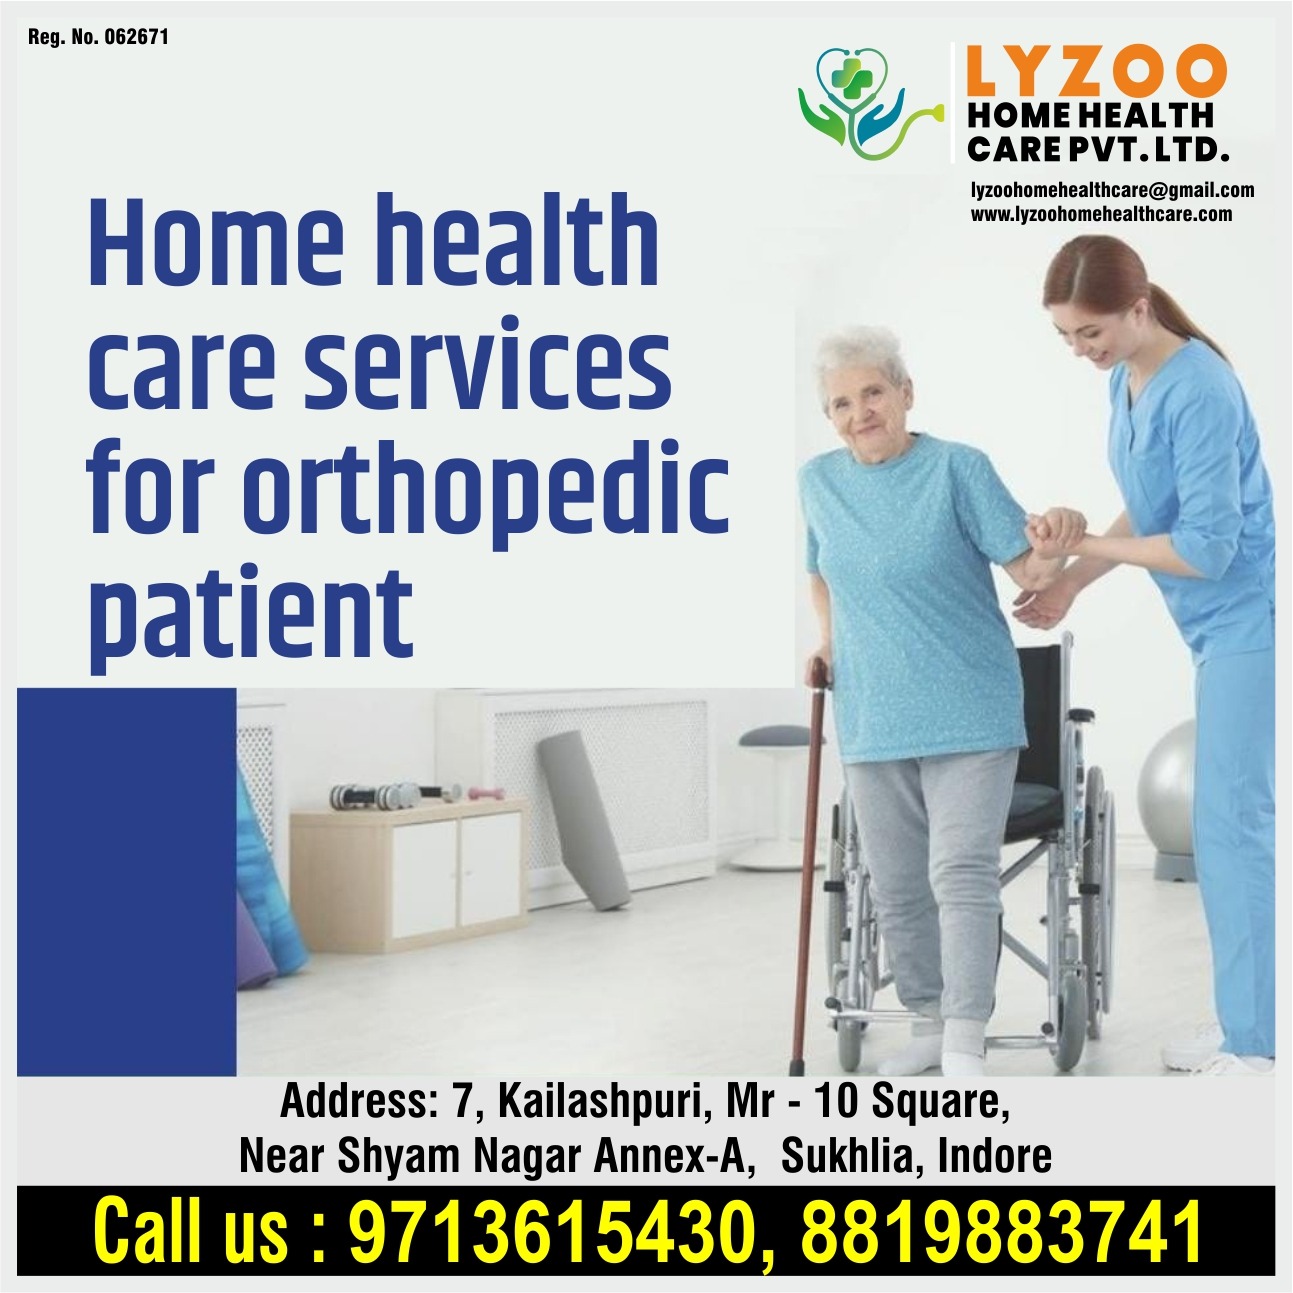 Home Care Services For Orthopedic Patients in Indore